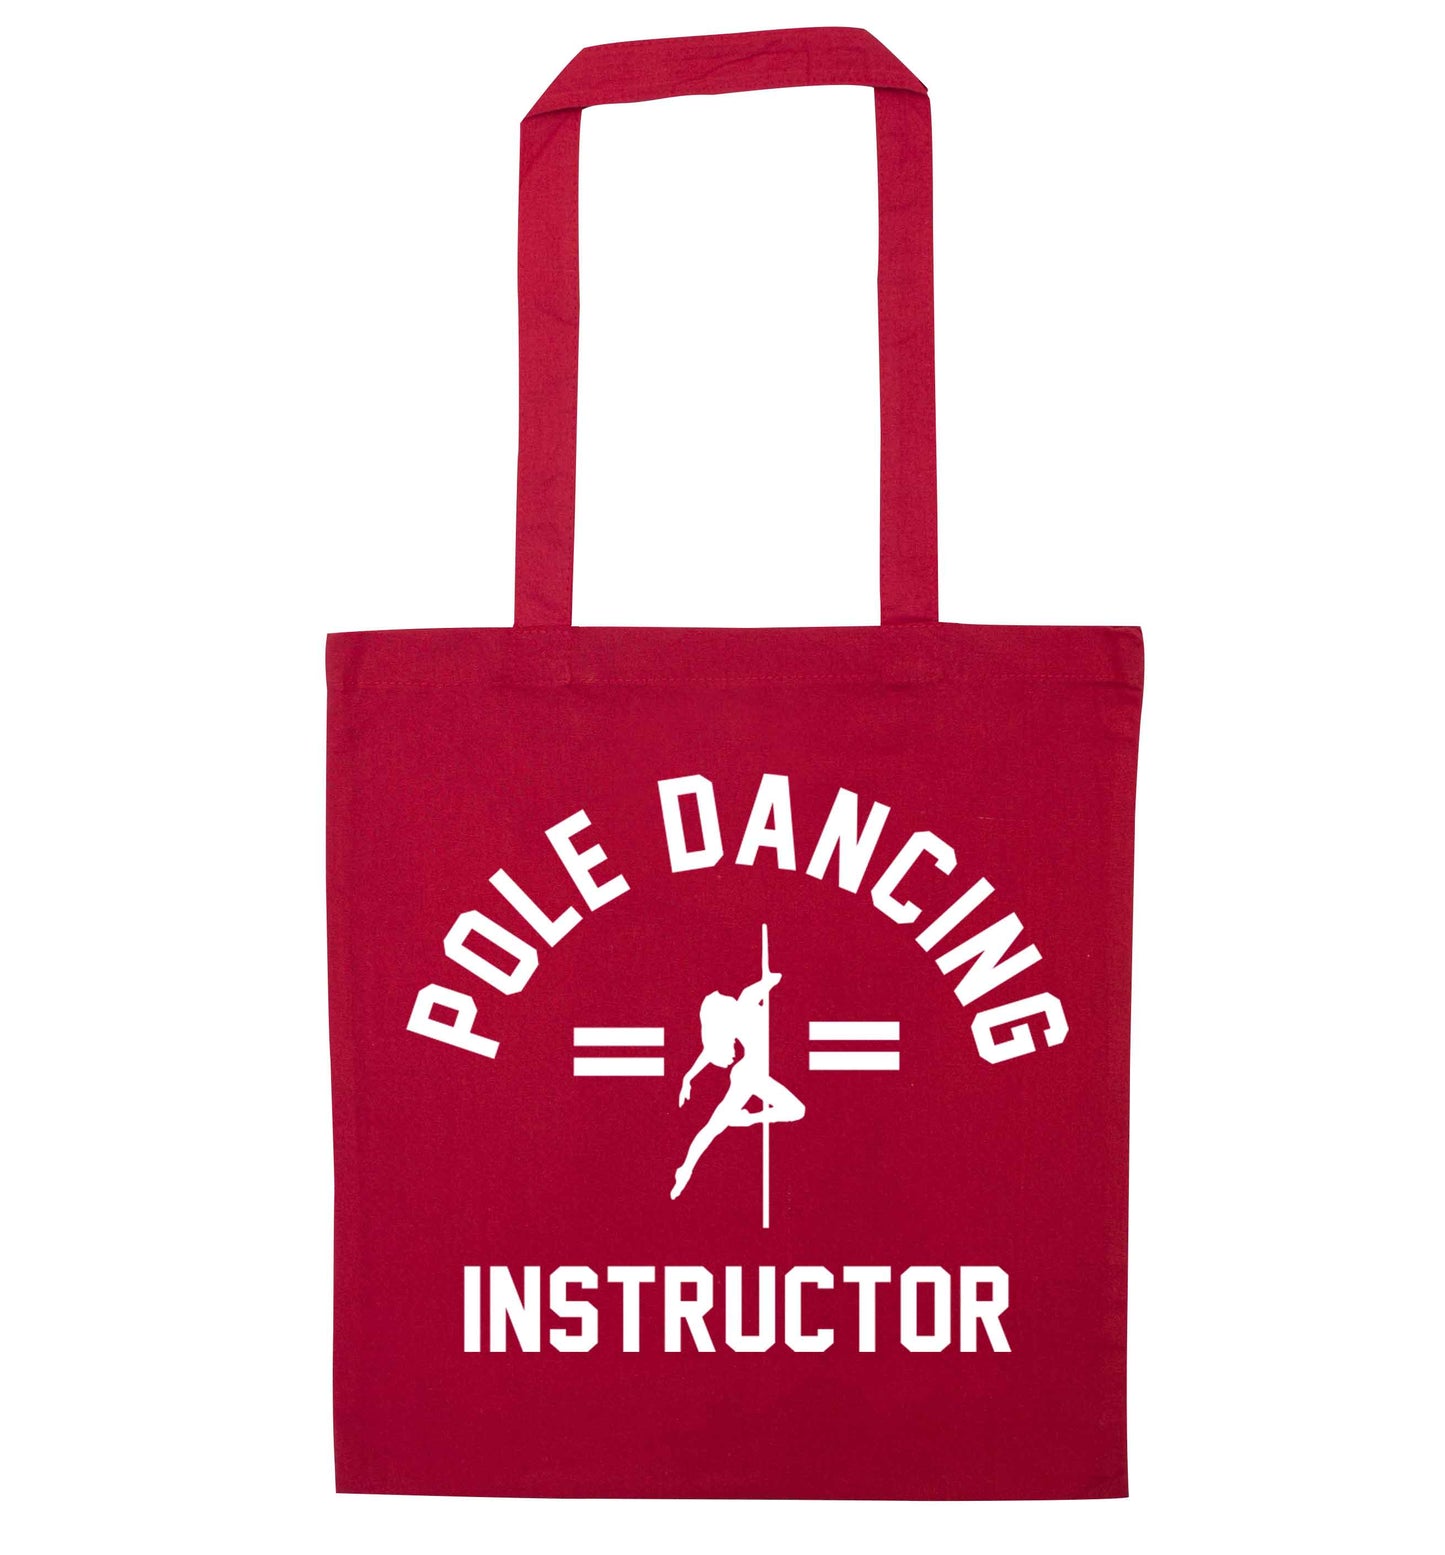 Pole dancing instructor red tote bag